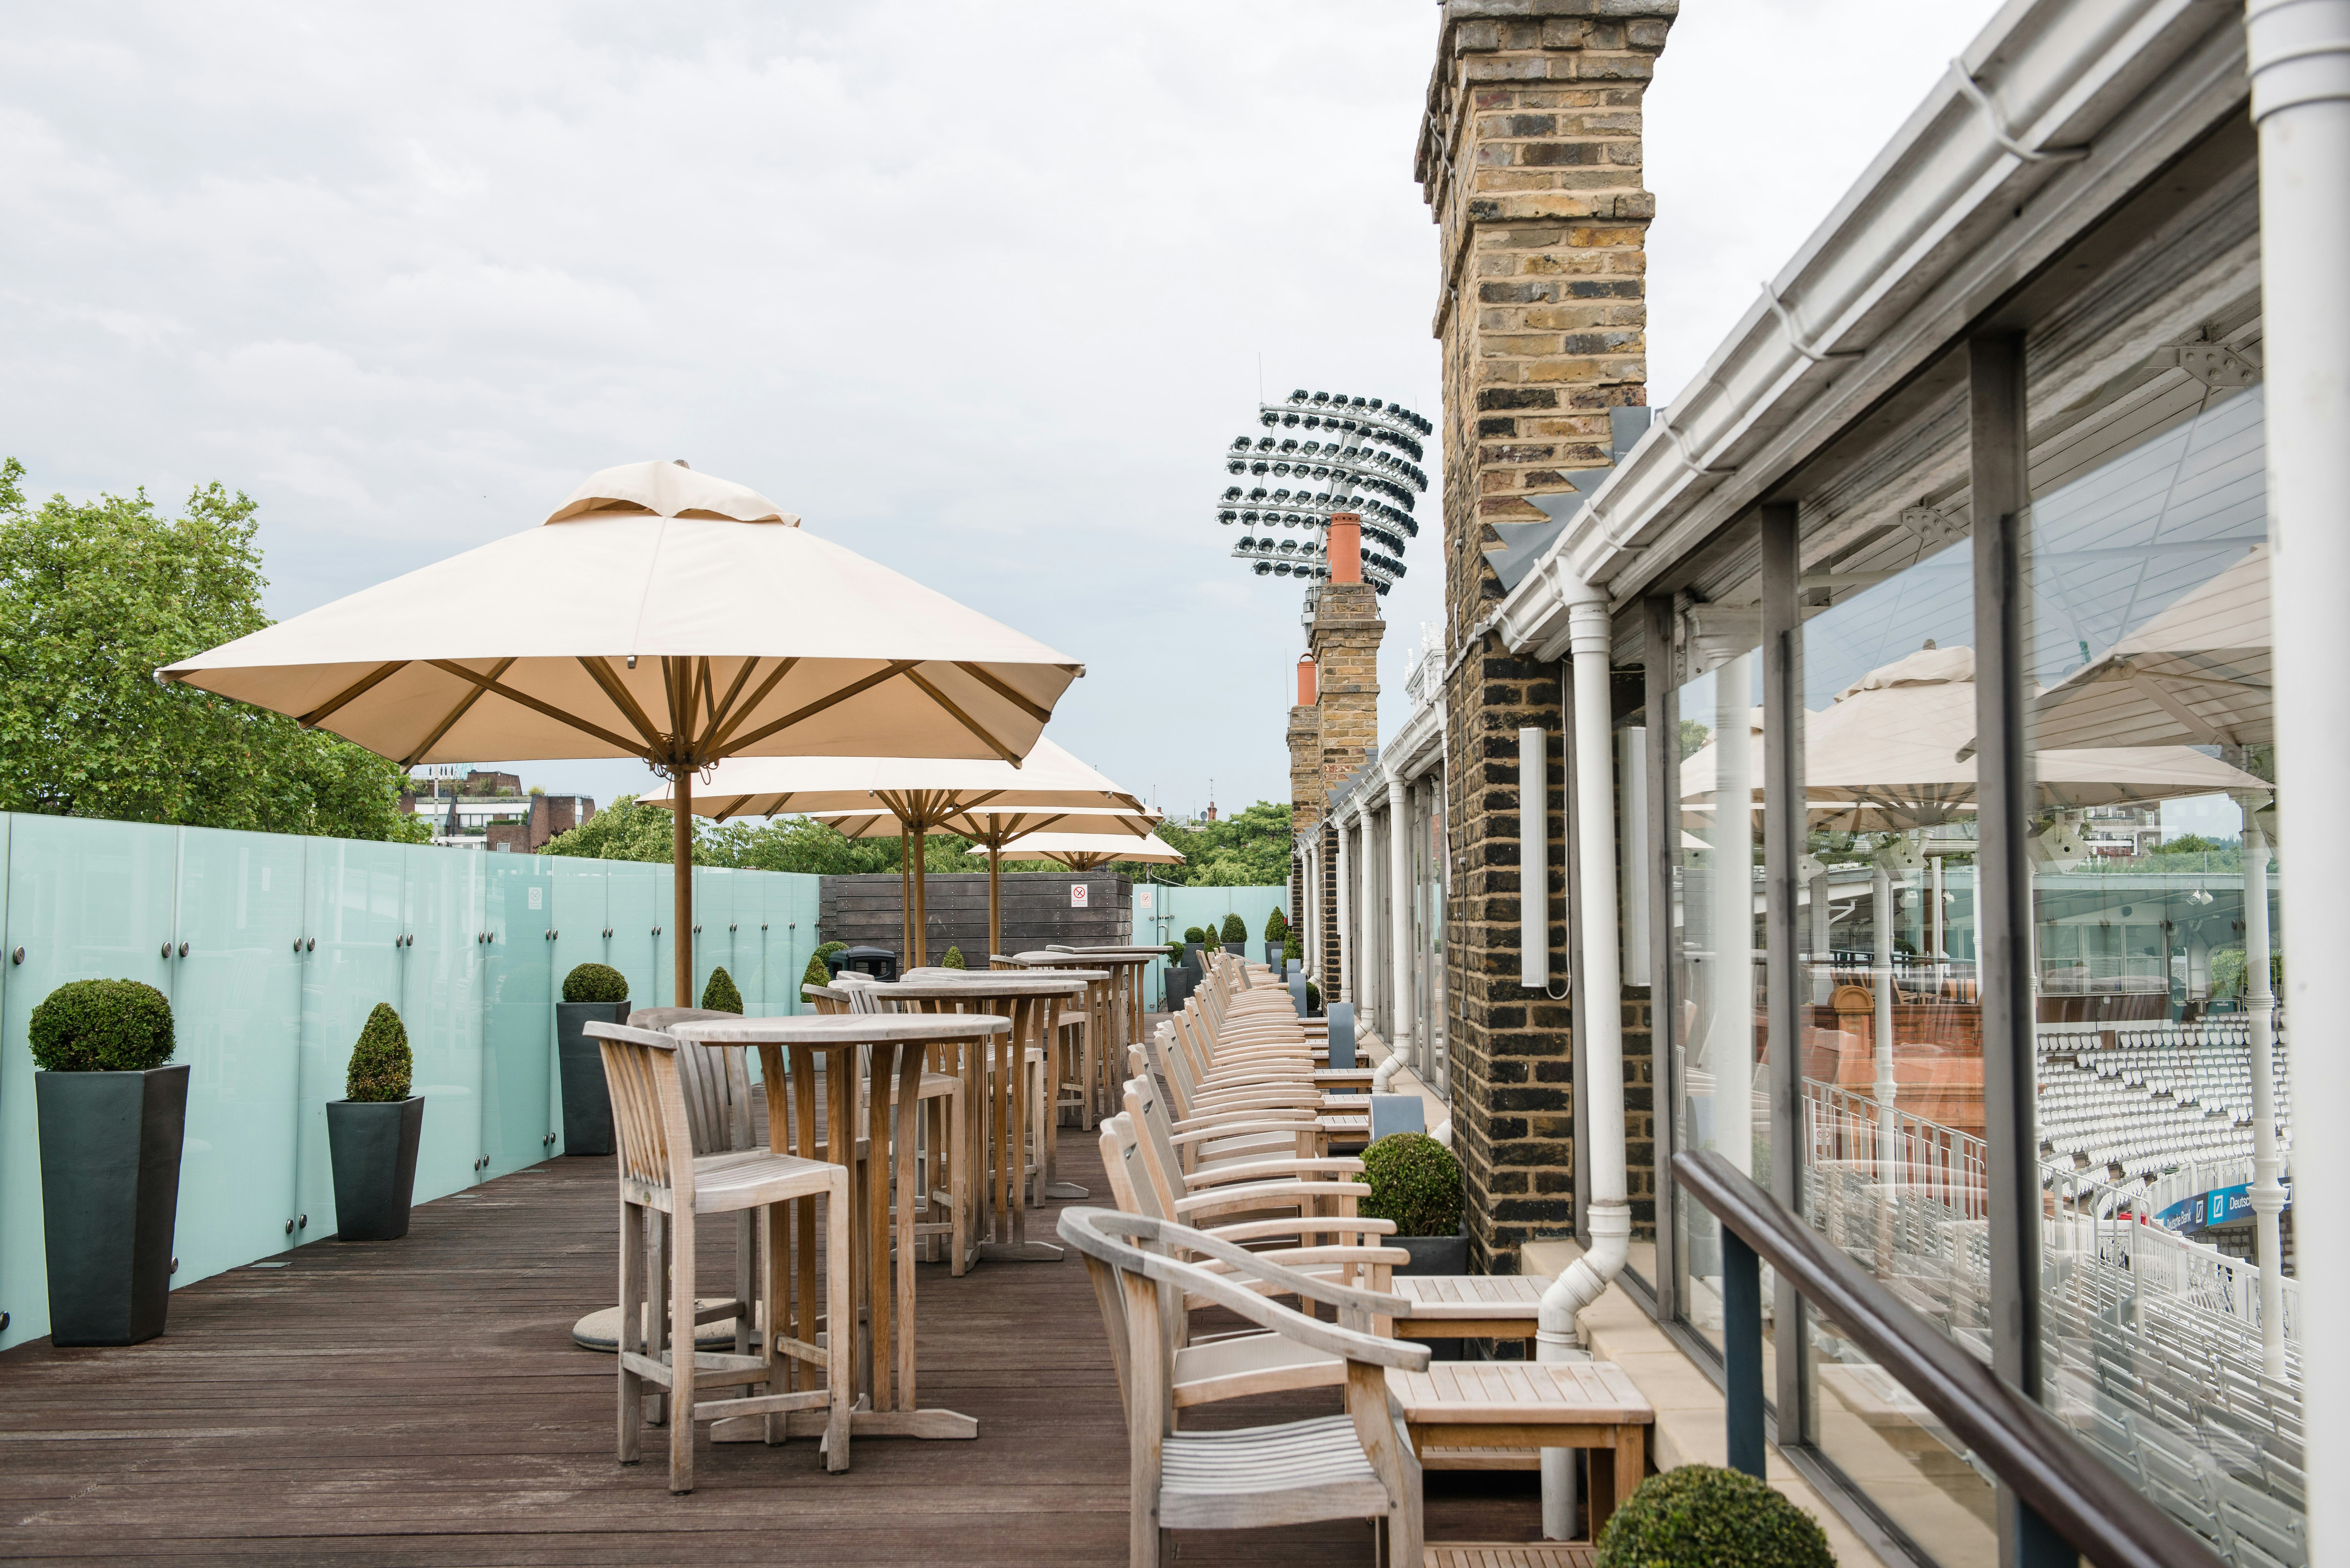 Corporate Summer Parties in London - Lord's Cricket Ground - Events in Pavilion Roof Terrace - Banner